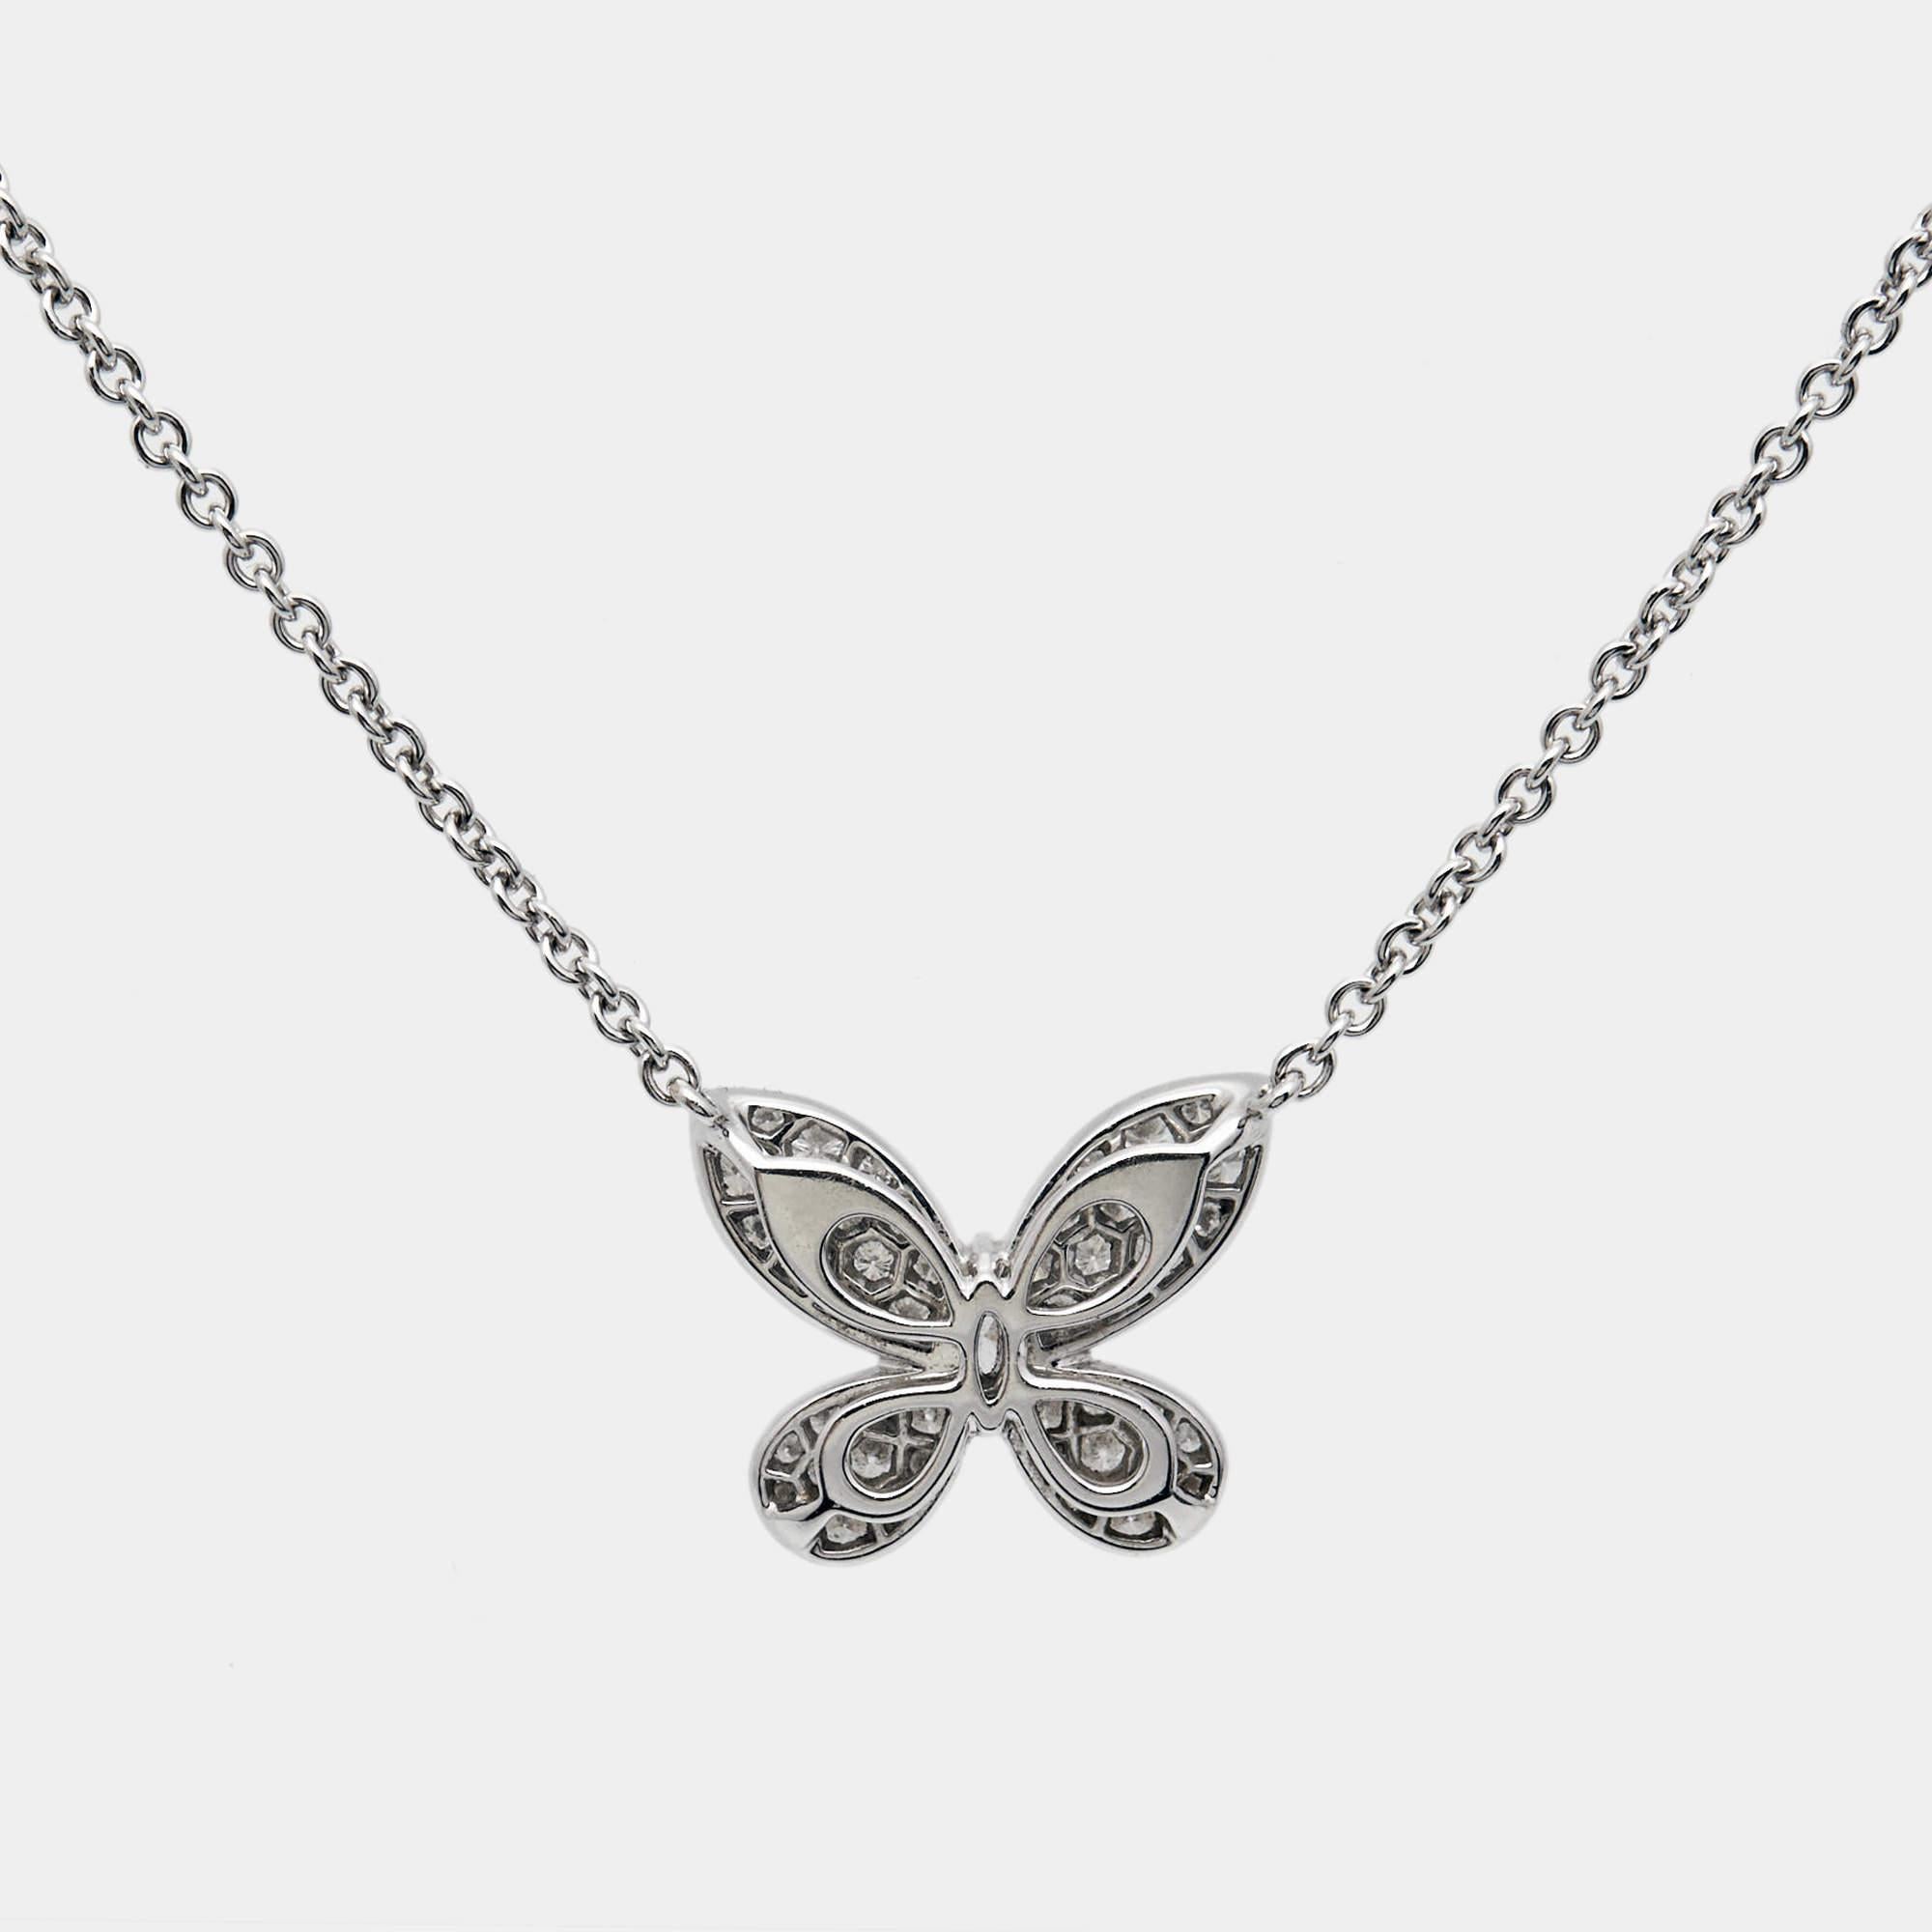 The Graff necklace is a stunning piece of jewelry crafted from 18K white gold. Its delicate pendant features a butterfly motif adorned with brilliant-cut diamonds, creating a dazzling sparkle. The pendant hangs gracefully from a matching white gold